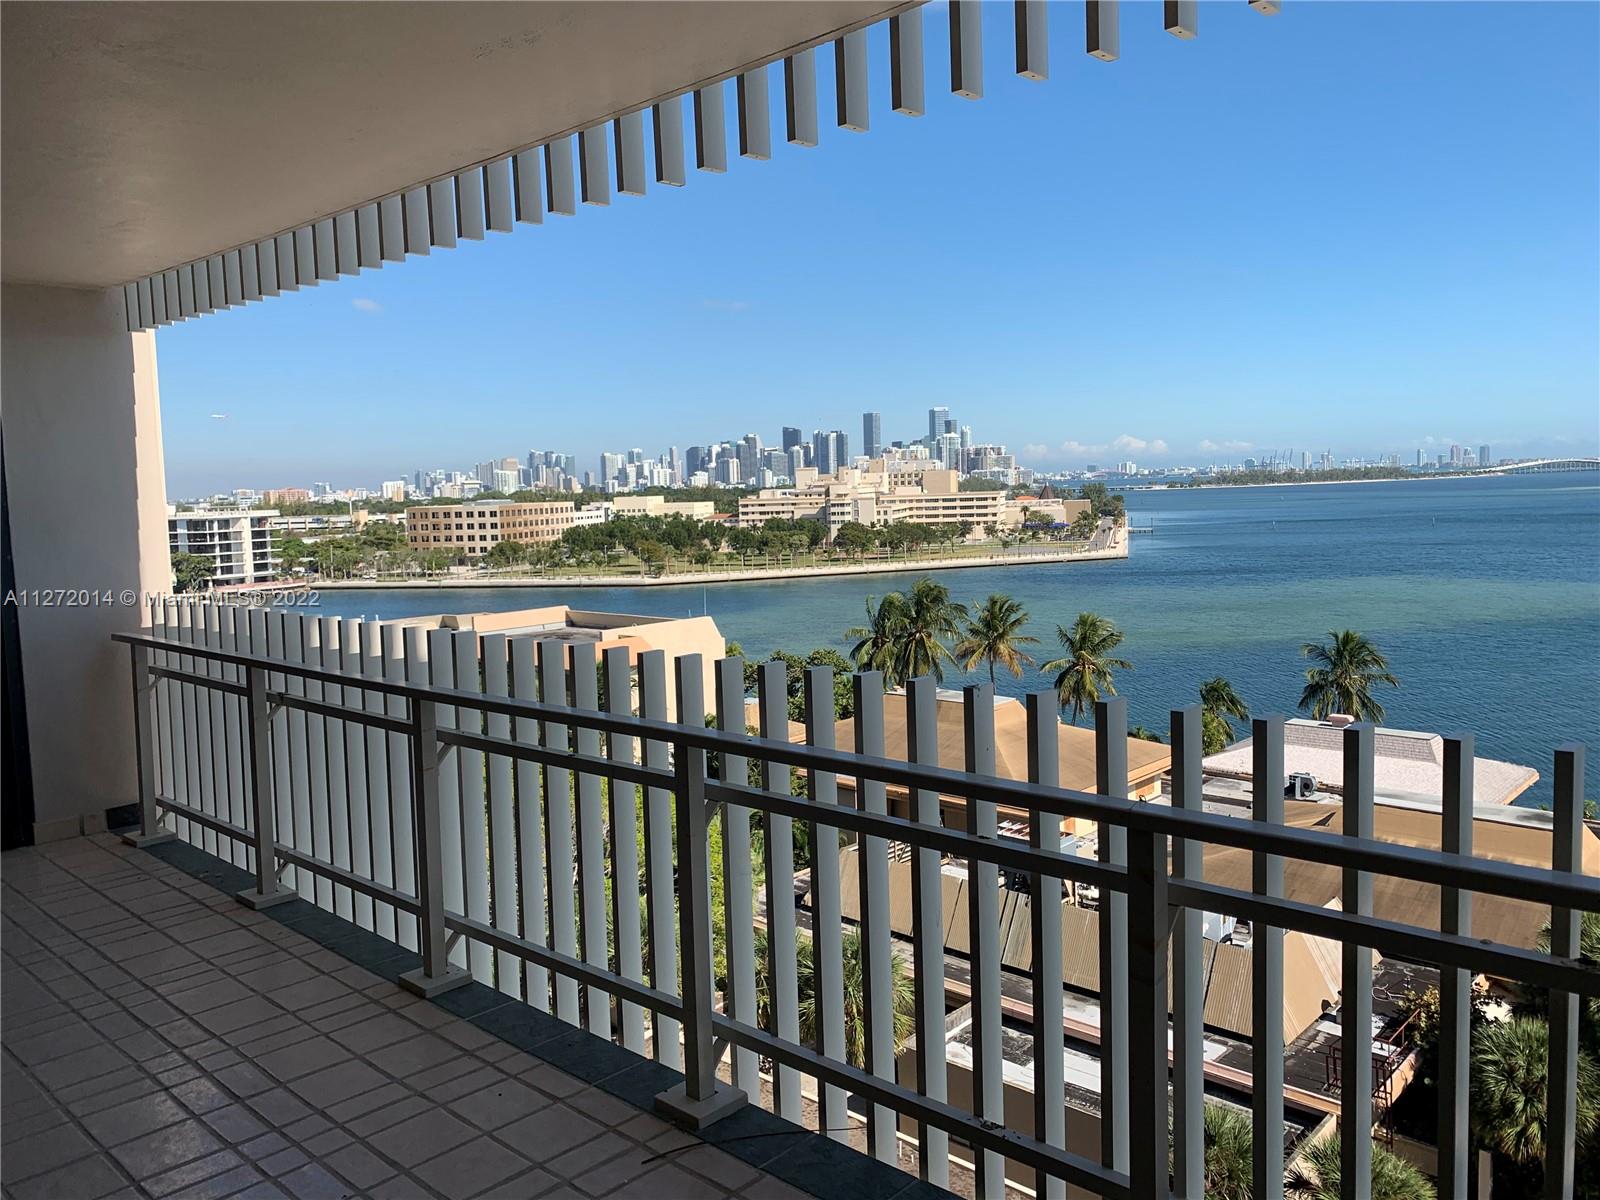 Great oversized 2 bed/2 bath (split floor) plan unit with 1,882 sqf. Gorgeous water view to open bay and downtown Miami skylines. Large balcony facing the bay. Spacious closets and laundry area. Located in the heart of Miami, this private island property offers paradise atmosphere living, surrounded by great amenities, jogging paths, pool, private marina, front desk service, door attendant and 24 hrs security, barbecue grills, gym, and valet + guest parking 24/7.